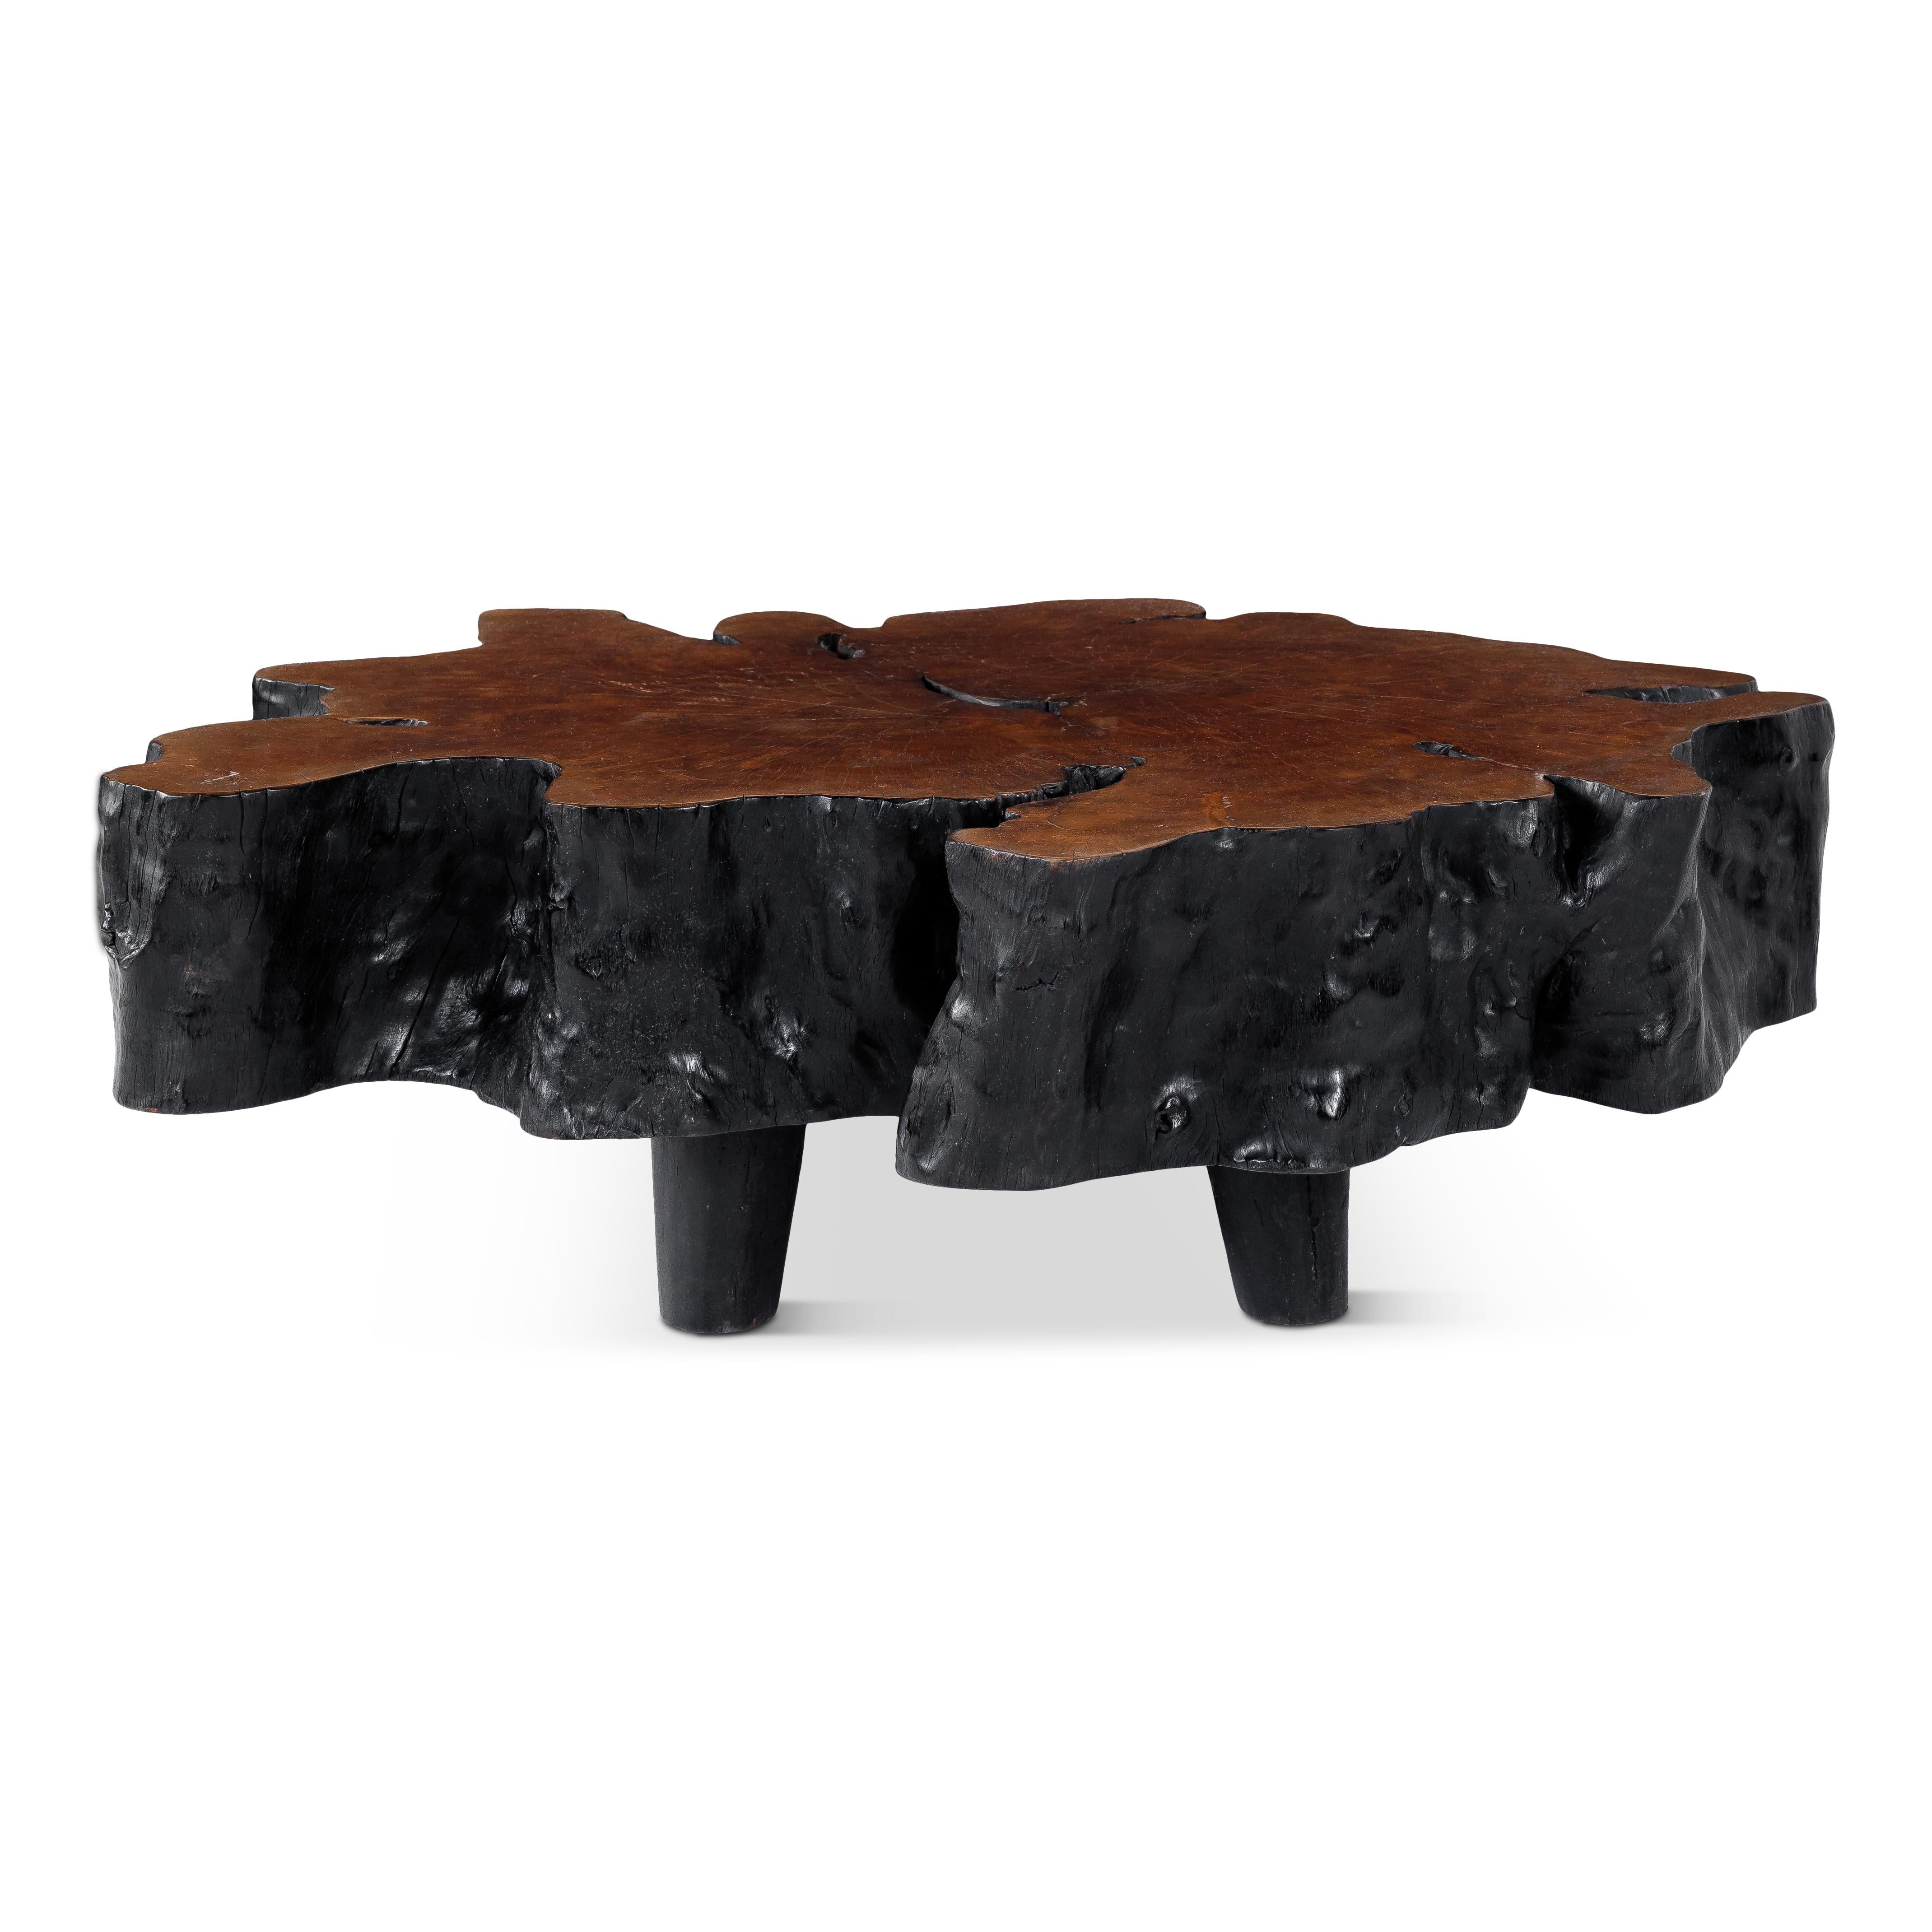 Organic form lychee wood coffee table.

This piece is a part of Brendan Bass’s one-of-a-kind collection, Le Monde. French for “The World”, the Le Monde collection is made up of rare and hard to find pieces curated by Brendan from estate sales,